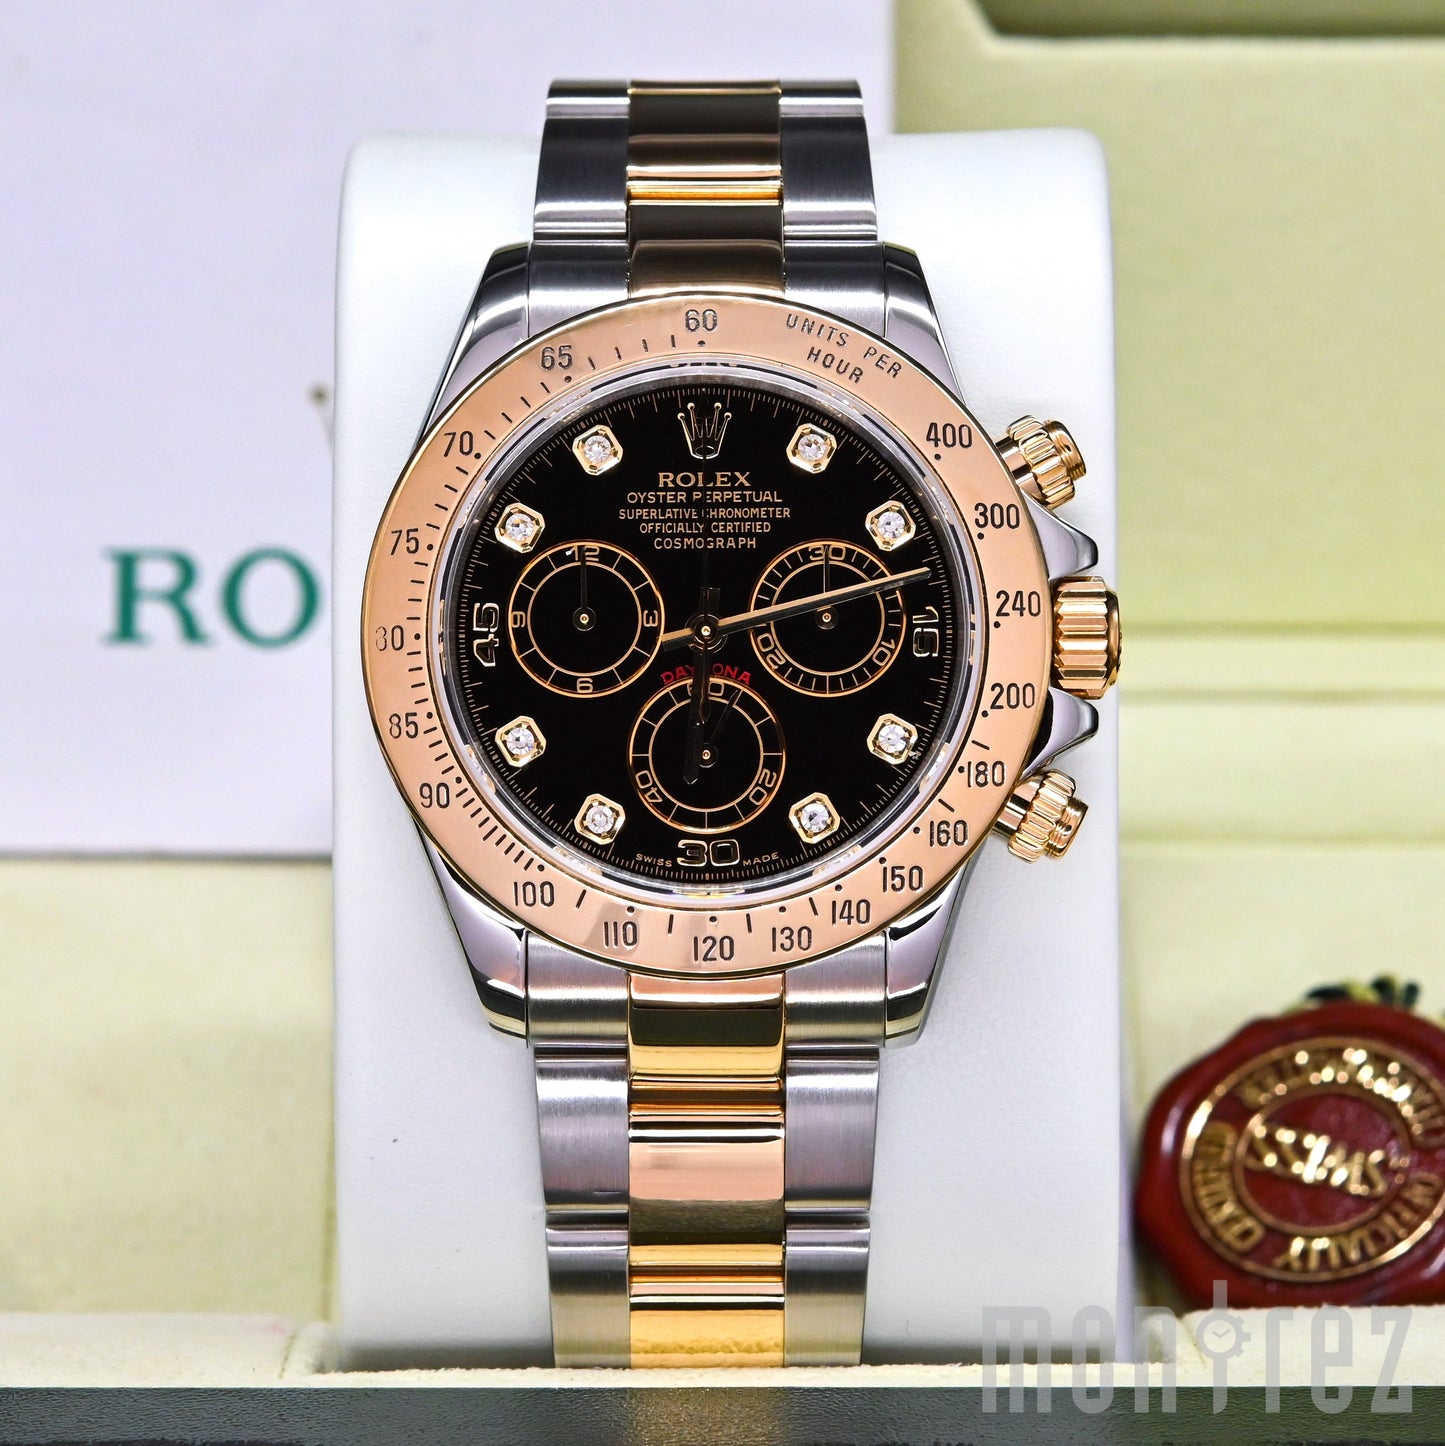 [Pre-Owned Watch] Rolex Cosmograph Daytona 40mm 116523 Black Dial with Diamonds (Out of Production) (888)